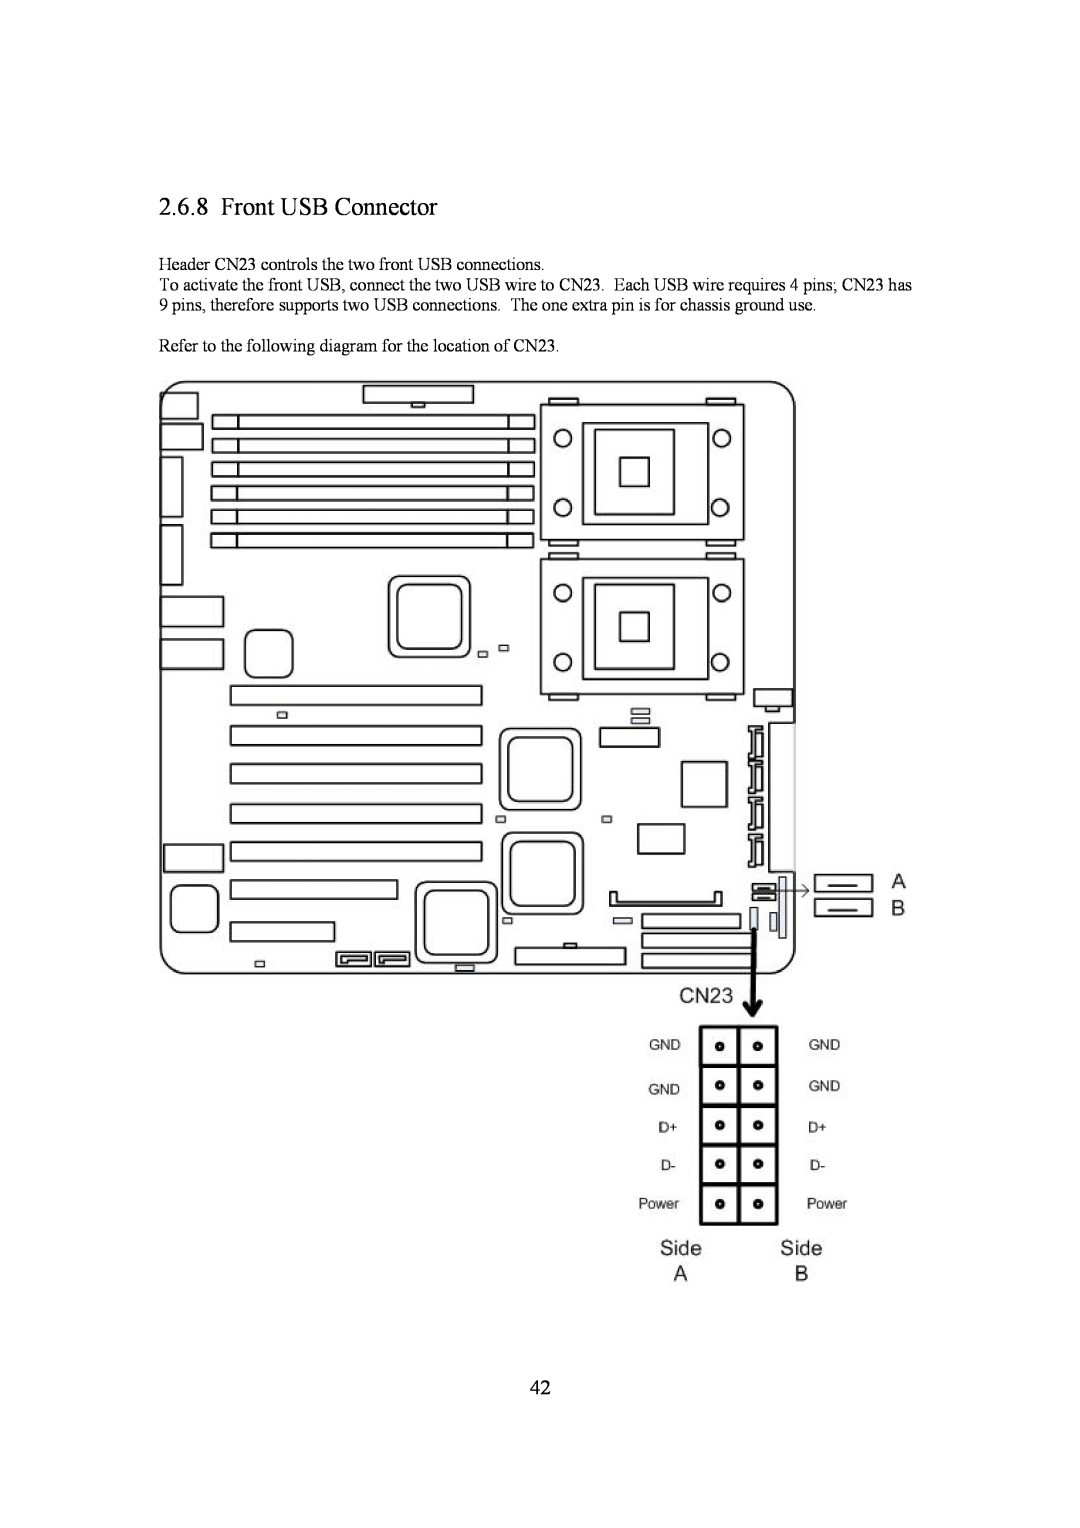 Intel LH500 user manual Front USB Connector 